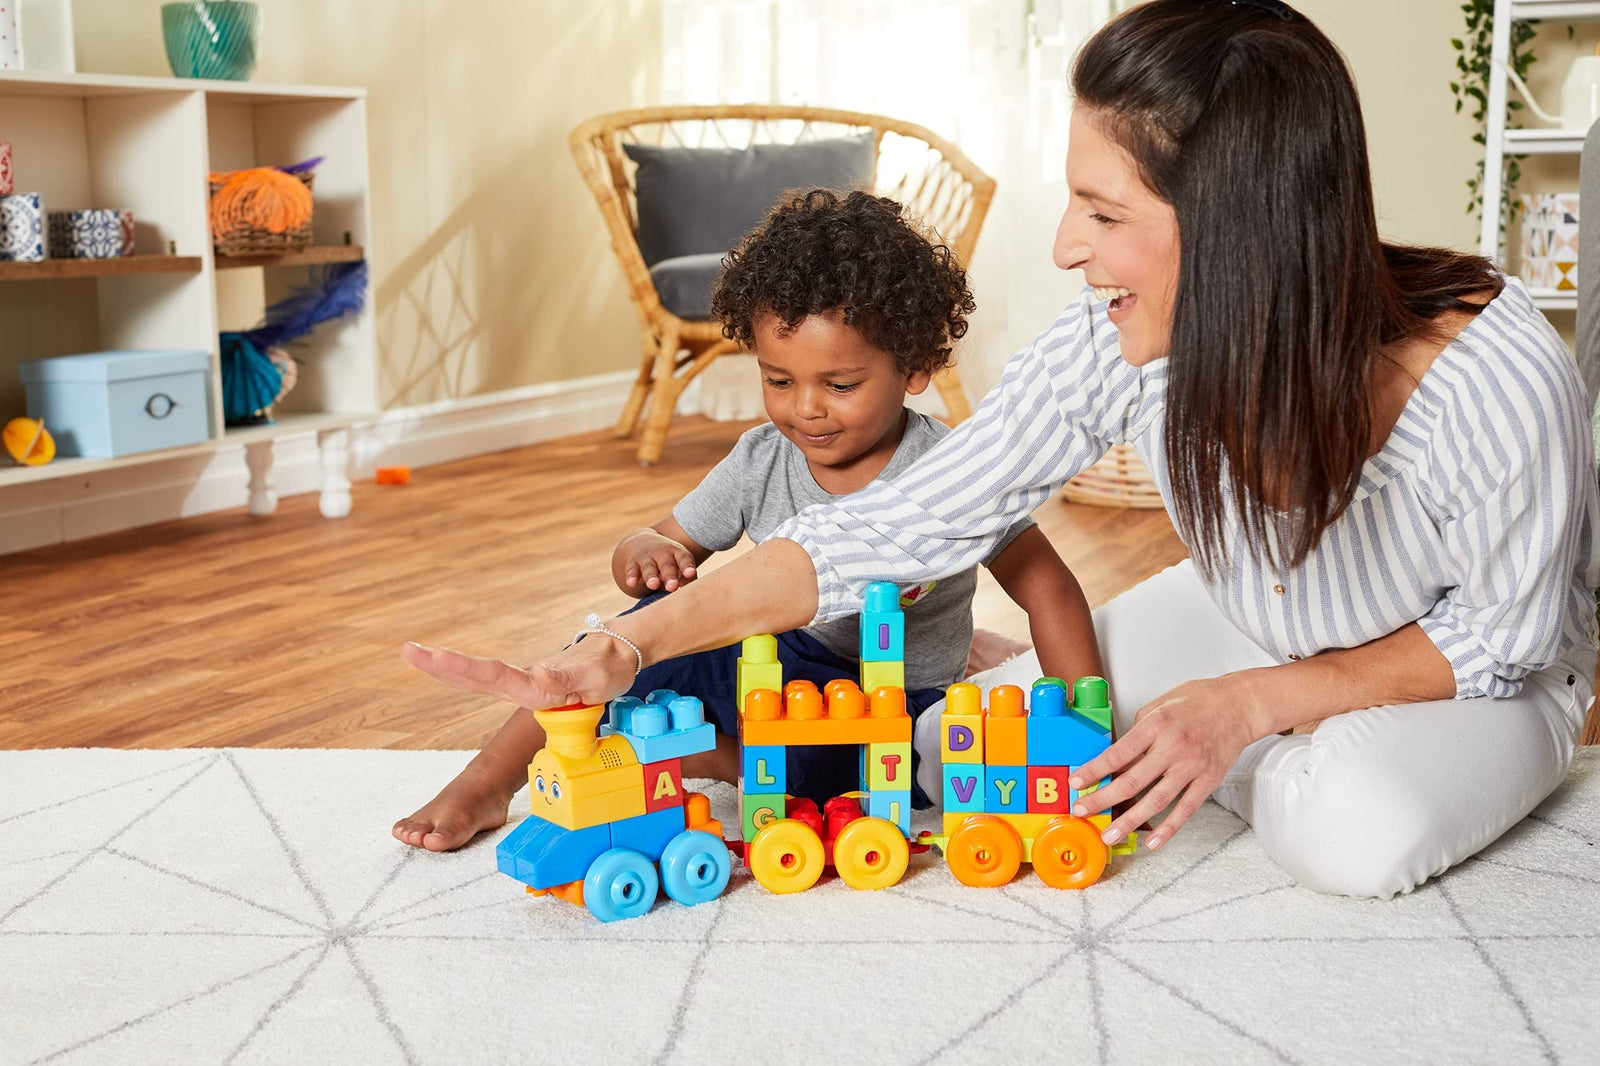 Mega Bloks First Builders ABC Musical Train with Big Building Blocks, Building Toys for Toddlers (50 Pieces)